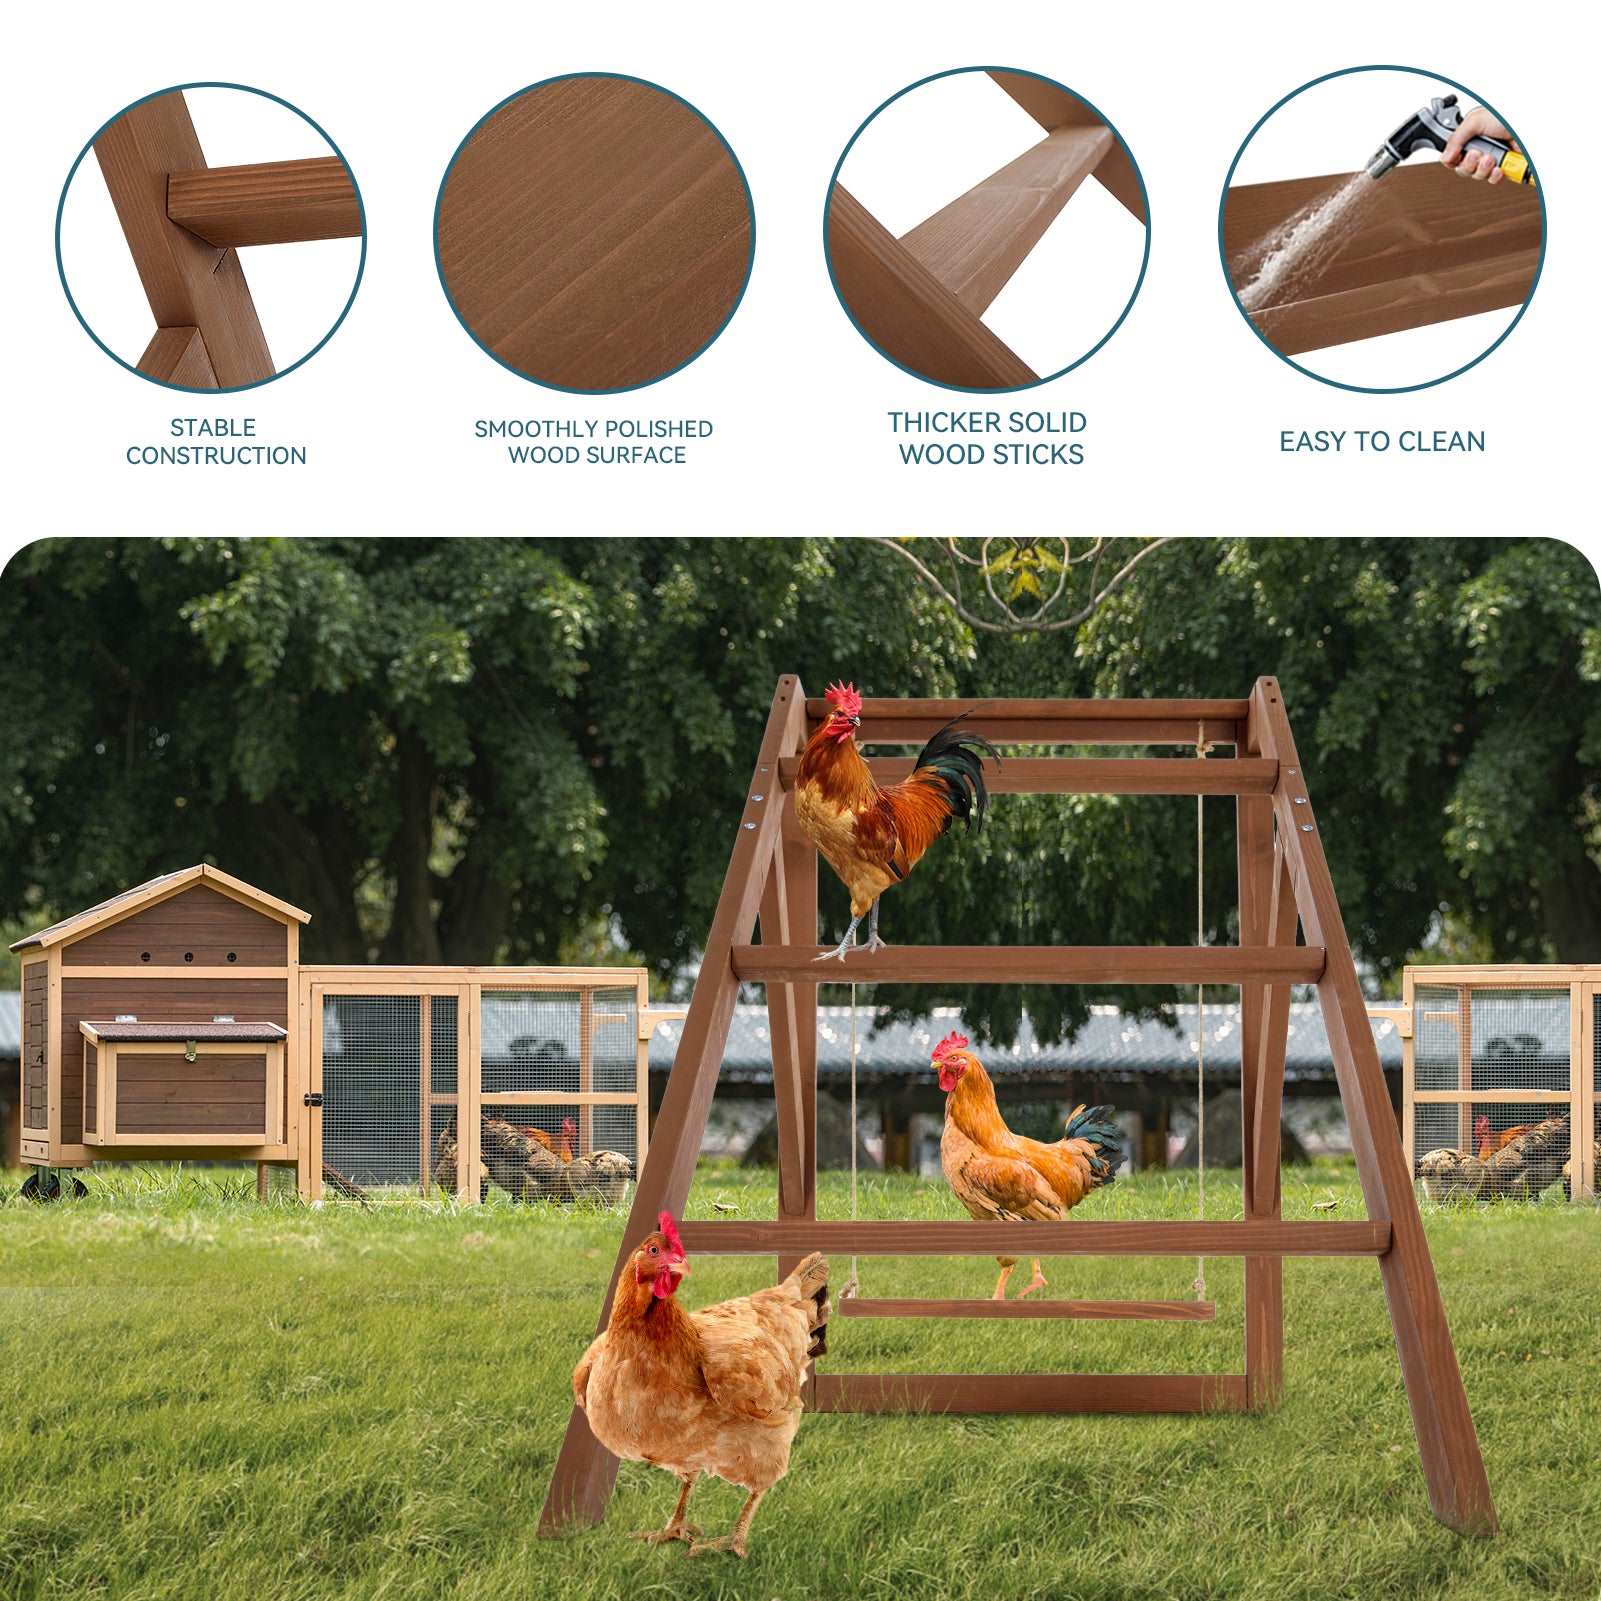 petsfit-chicken-swing-set-for-pets-healthy-happy-4-chicken-perches-with-swing-fit-for-8-10-chicks-chicken-toys-for-coop-accessories-03